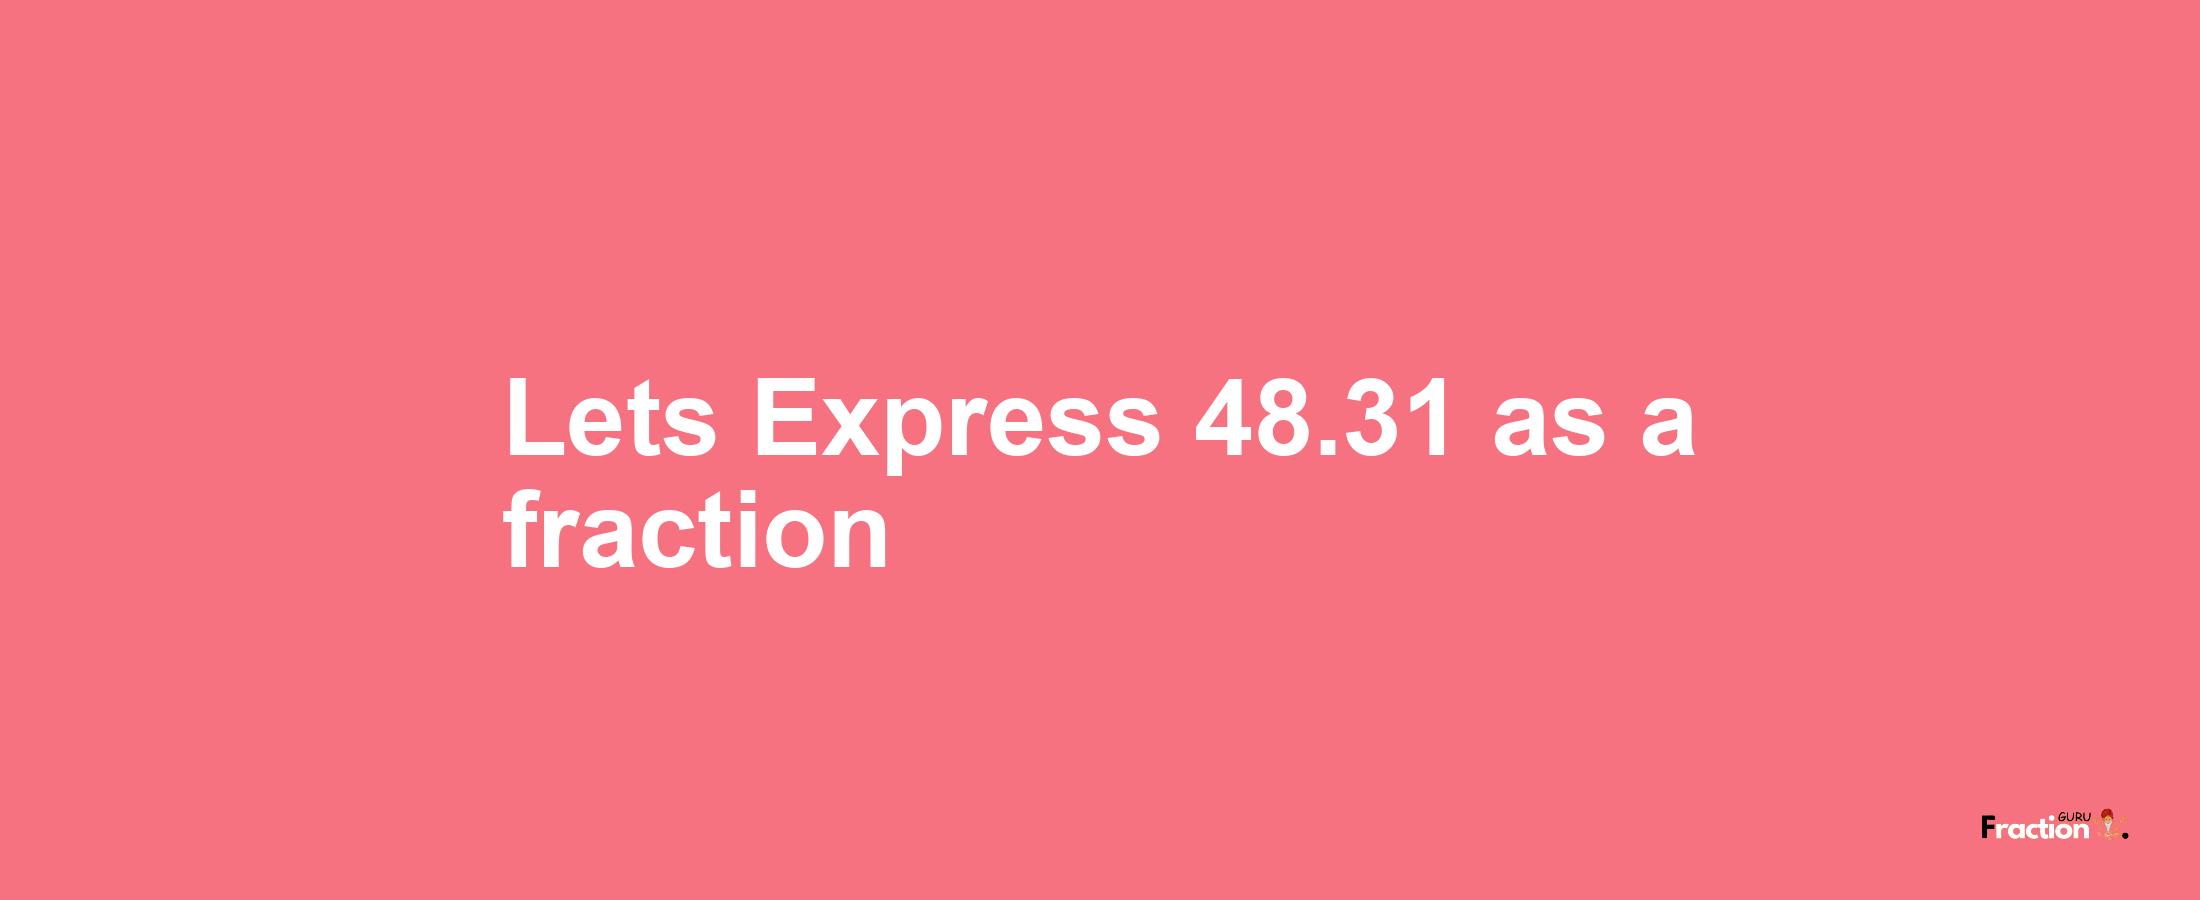 Lets Express 48.31 as afraction